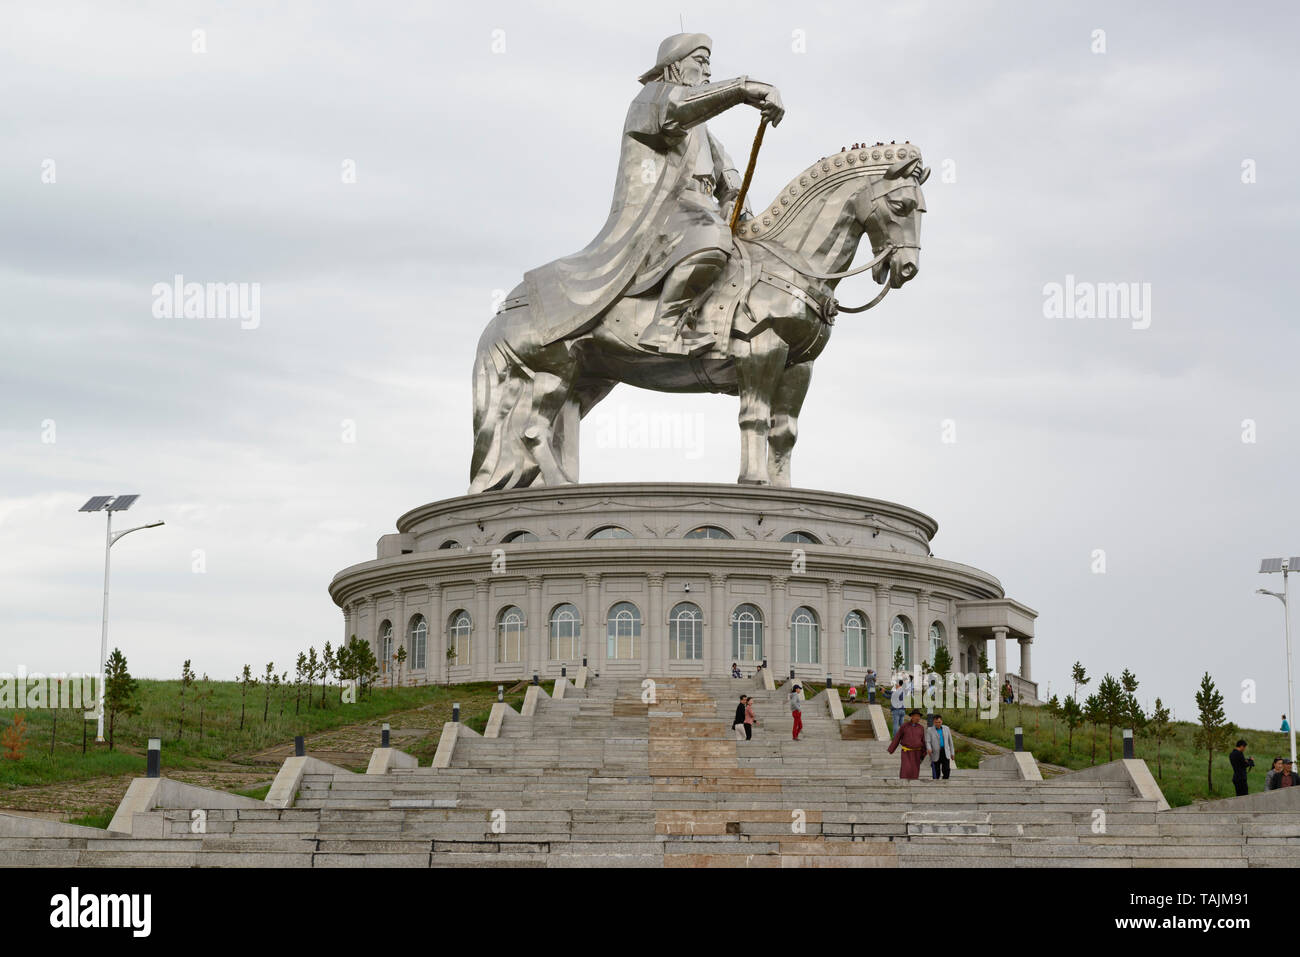 The Genghis Khan Equestrian Statue, part of the Genghis Khan Statue Complex, 54 km east of Ulaanbaatar, Mongolia. Stock Photo